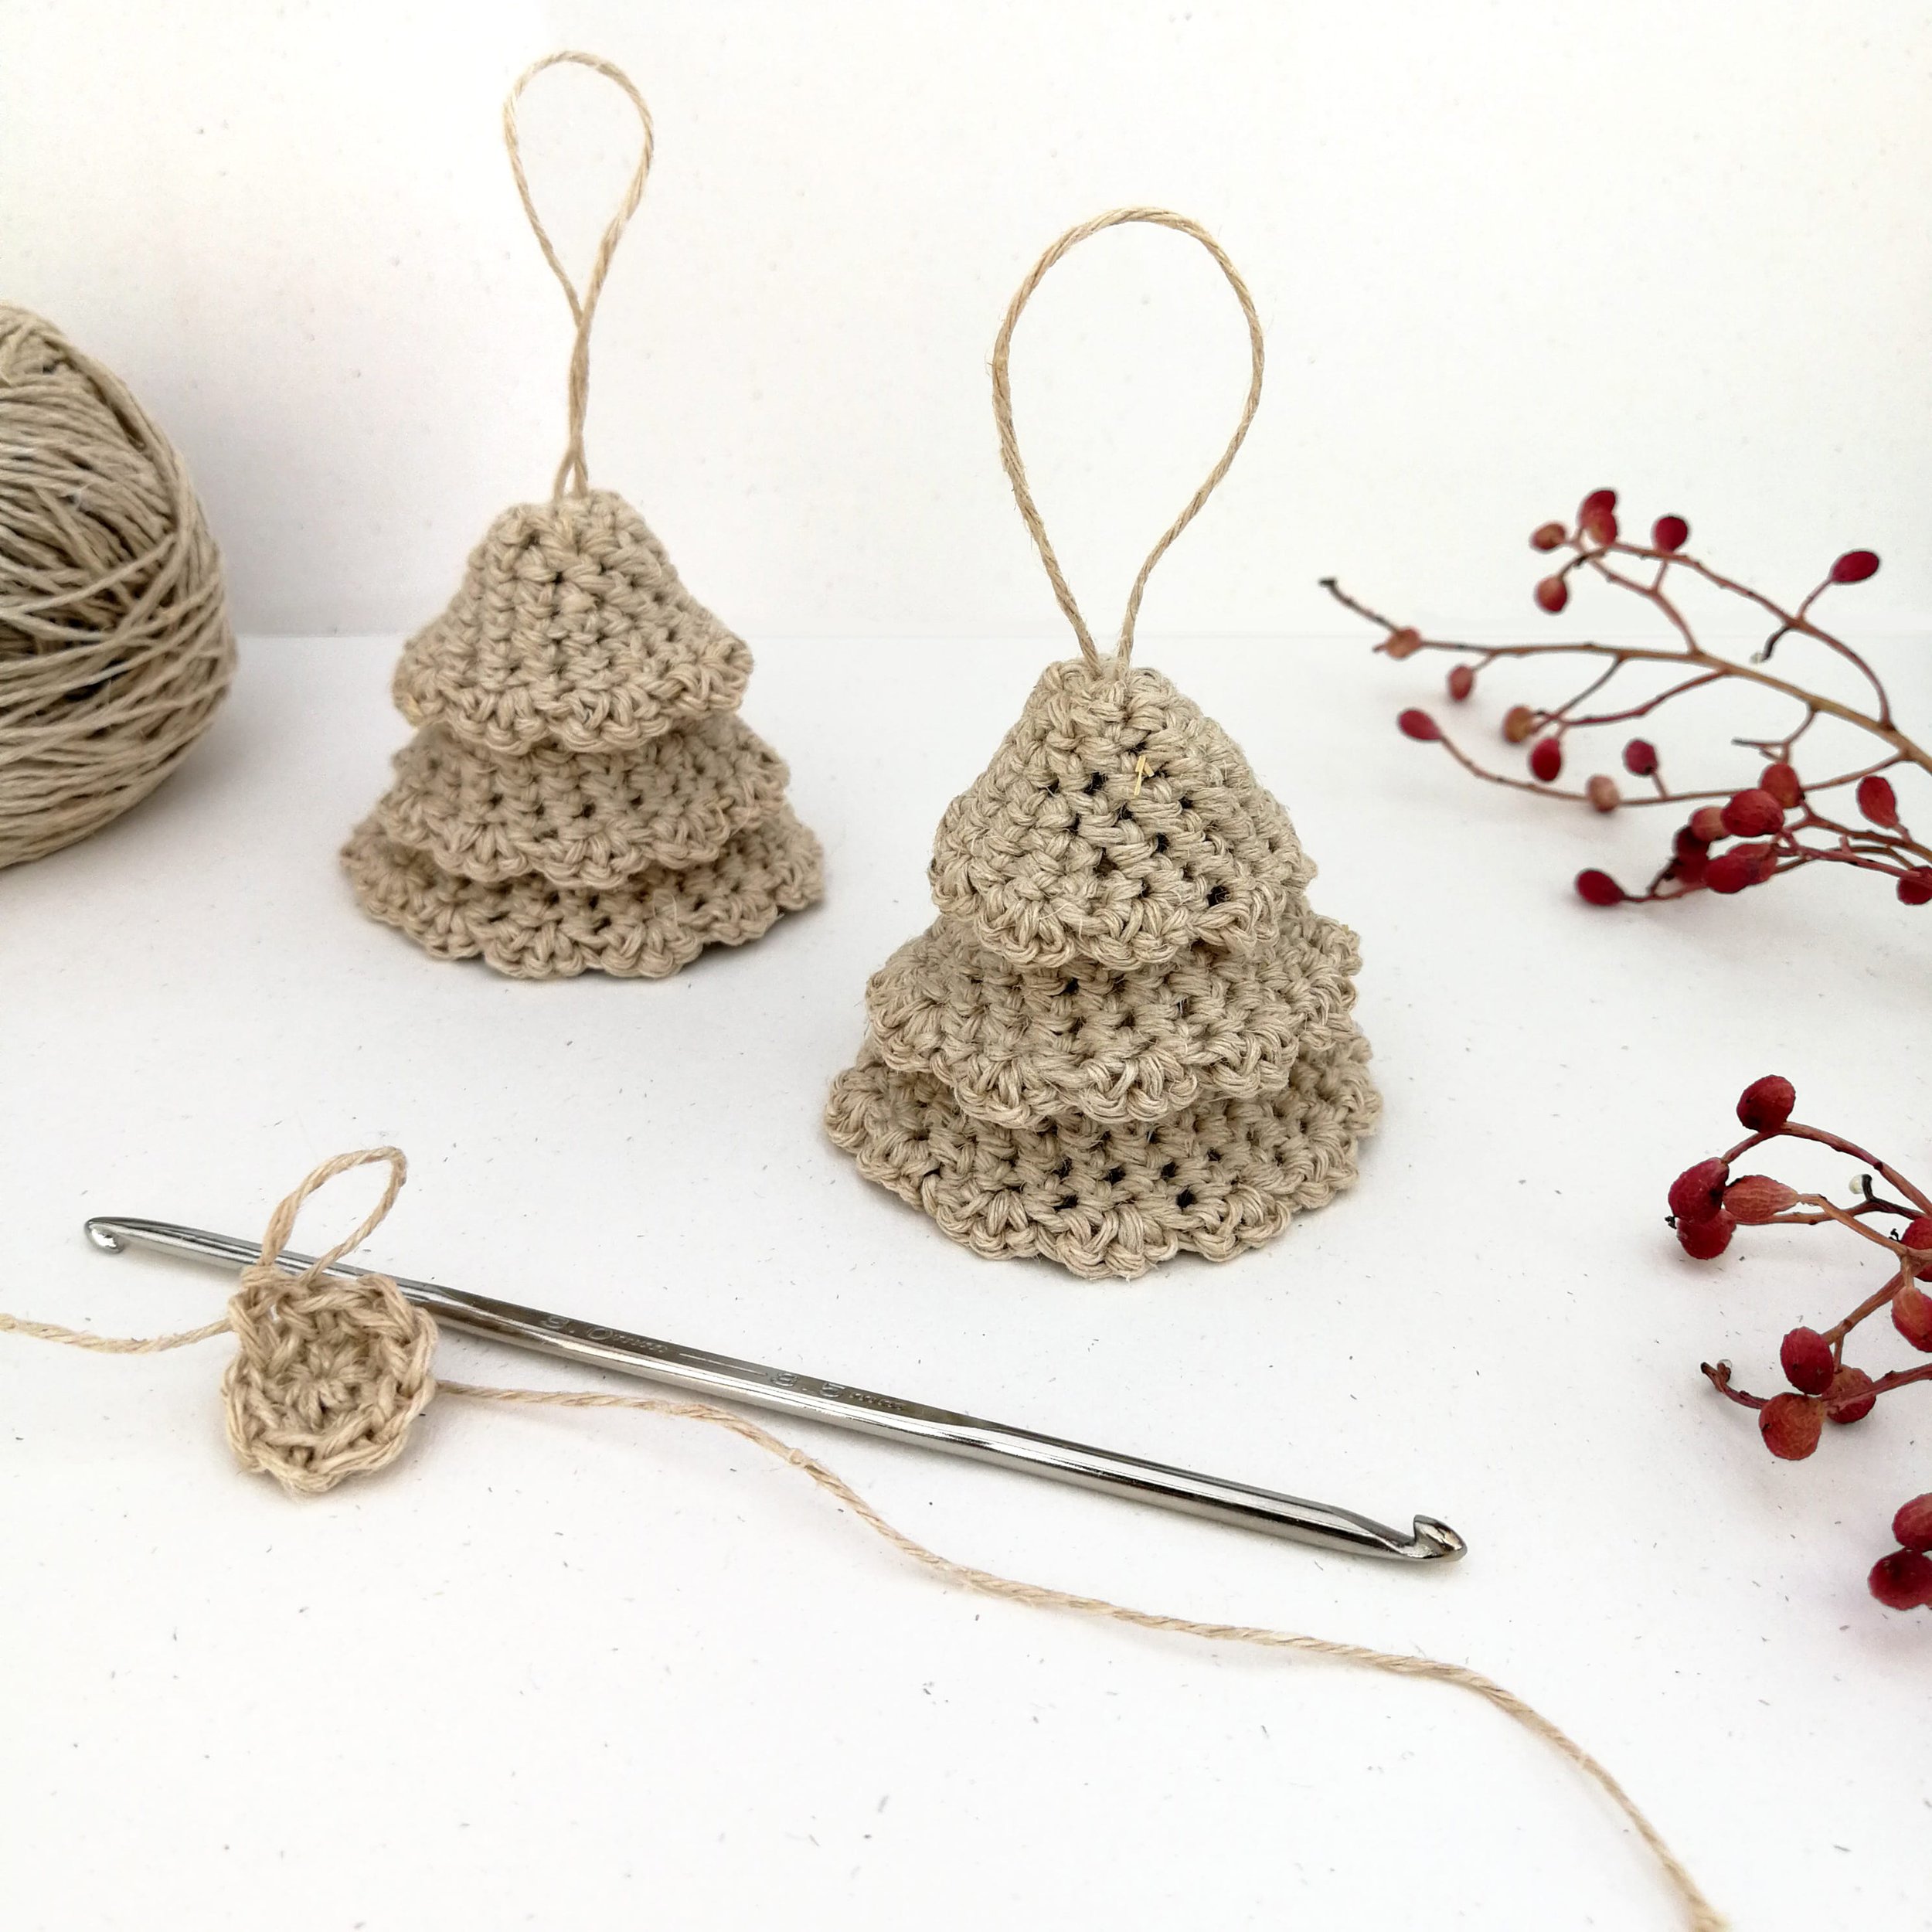 Two crocheted Christmas trees stand against a white background. They have three skirts stacked on top of each other to make the tree & a loop at the top. There are some small red berries along the right hand side & a ball of yarn in the top left.